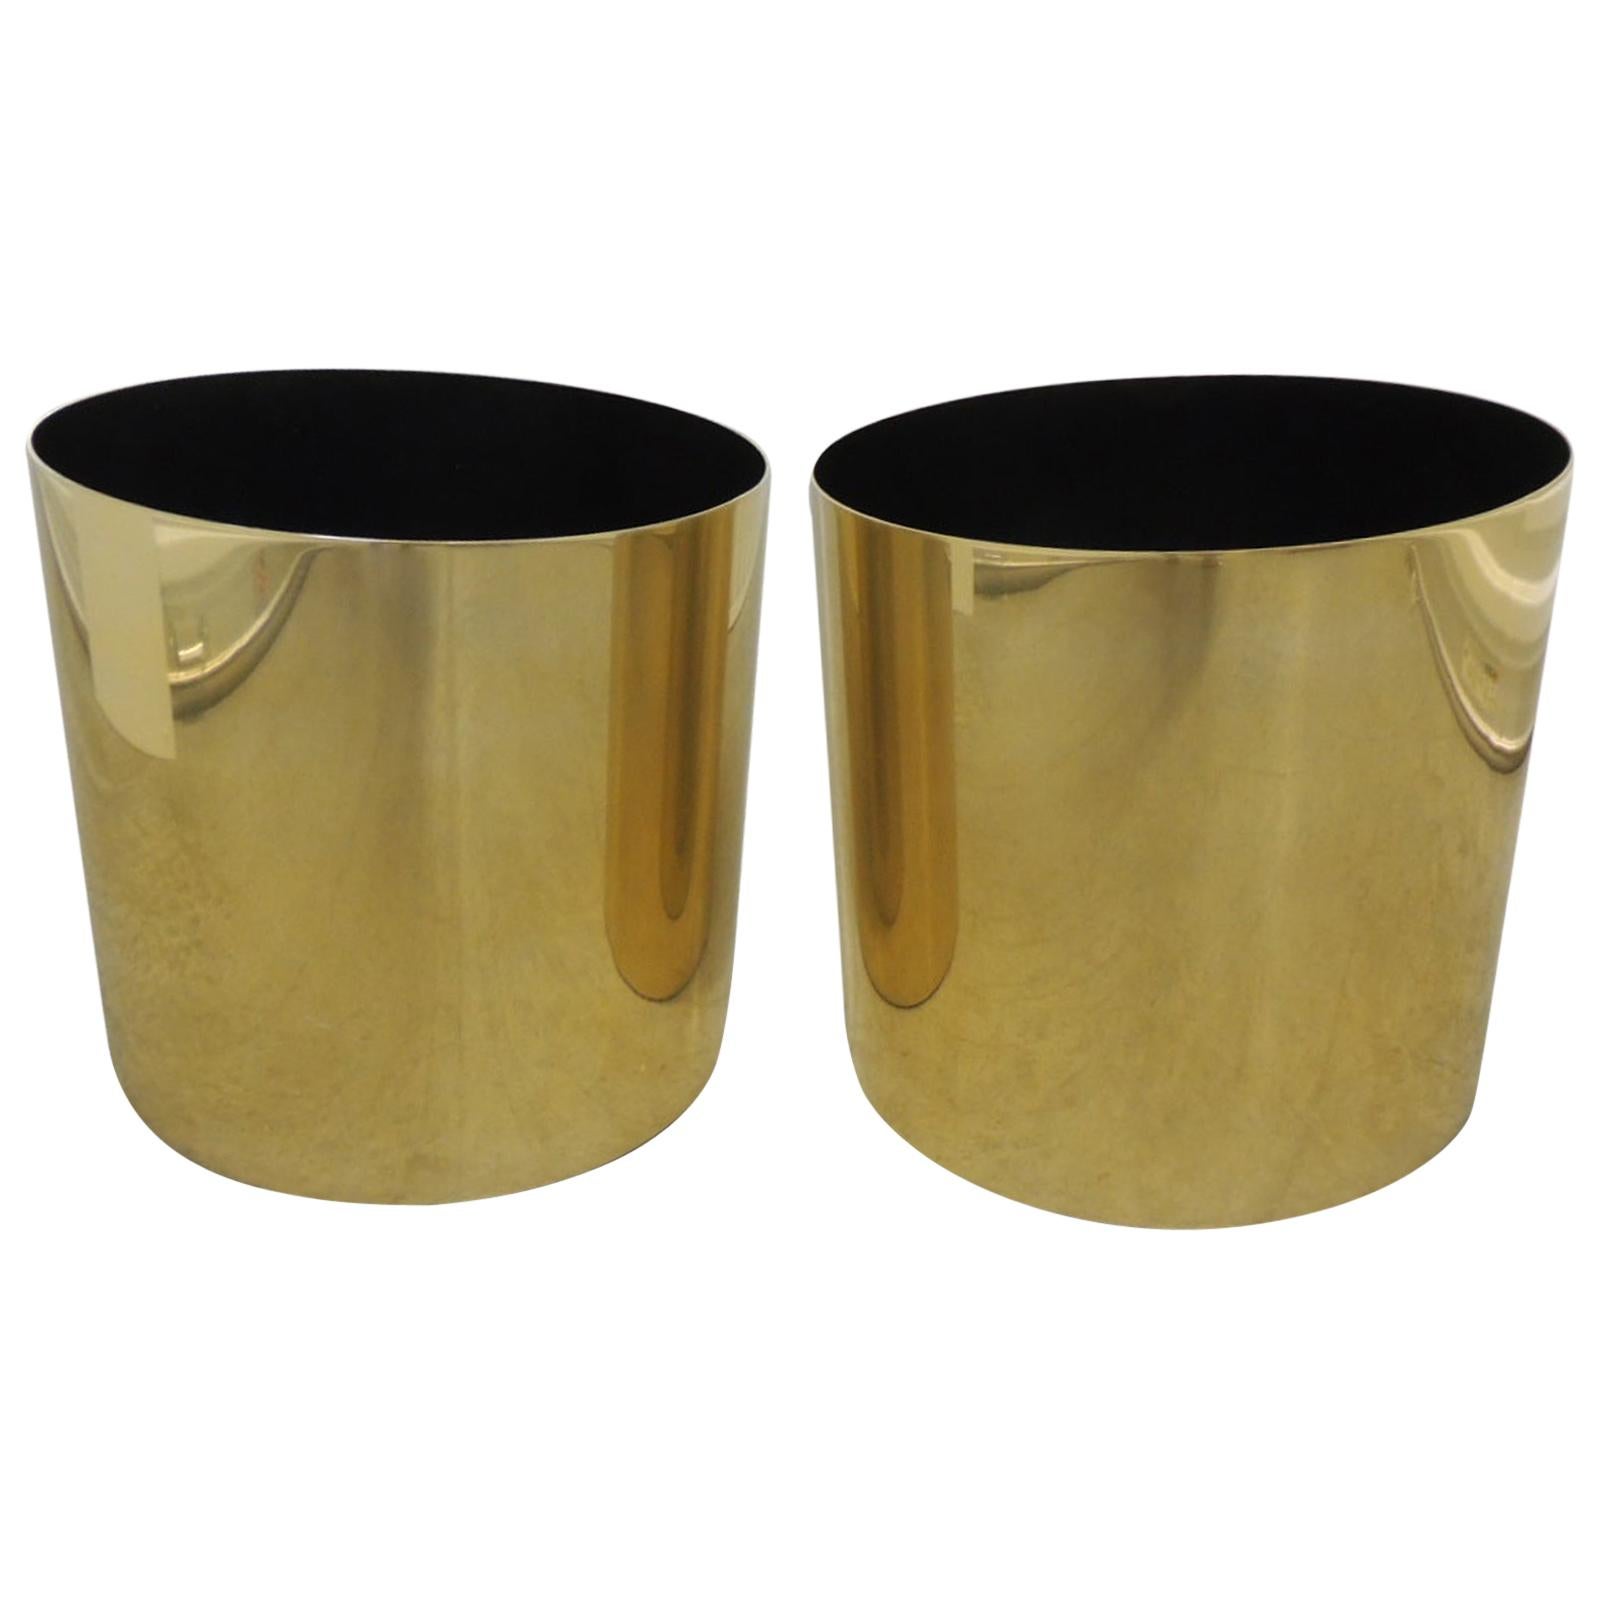 Large Mid-Century Modern Gold Color Round Planters